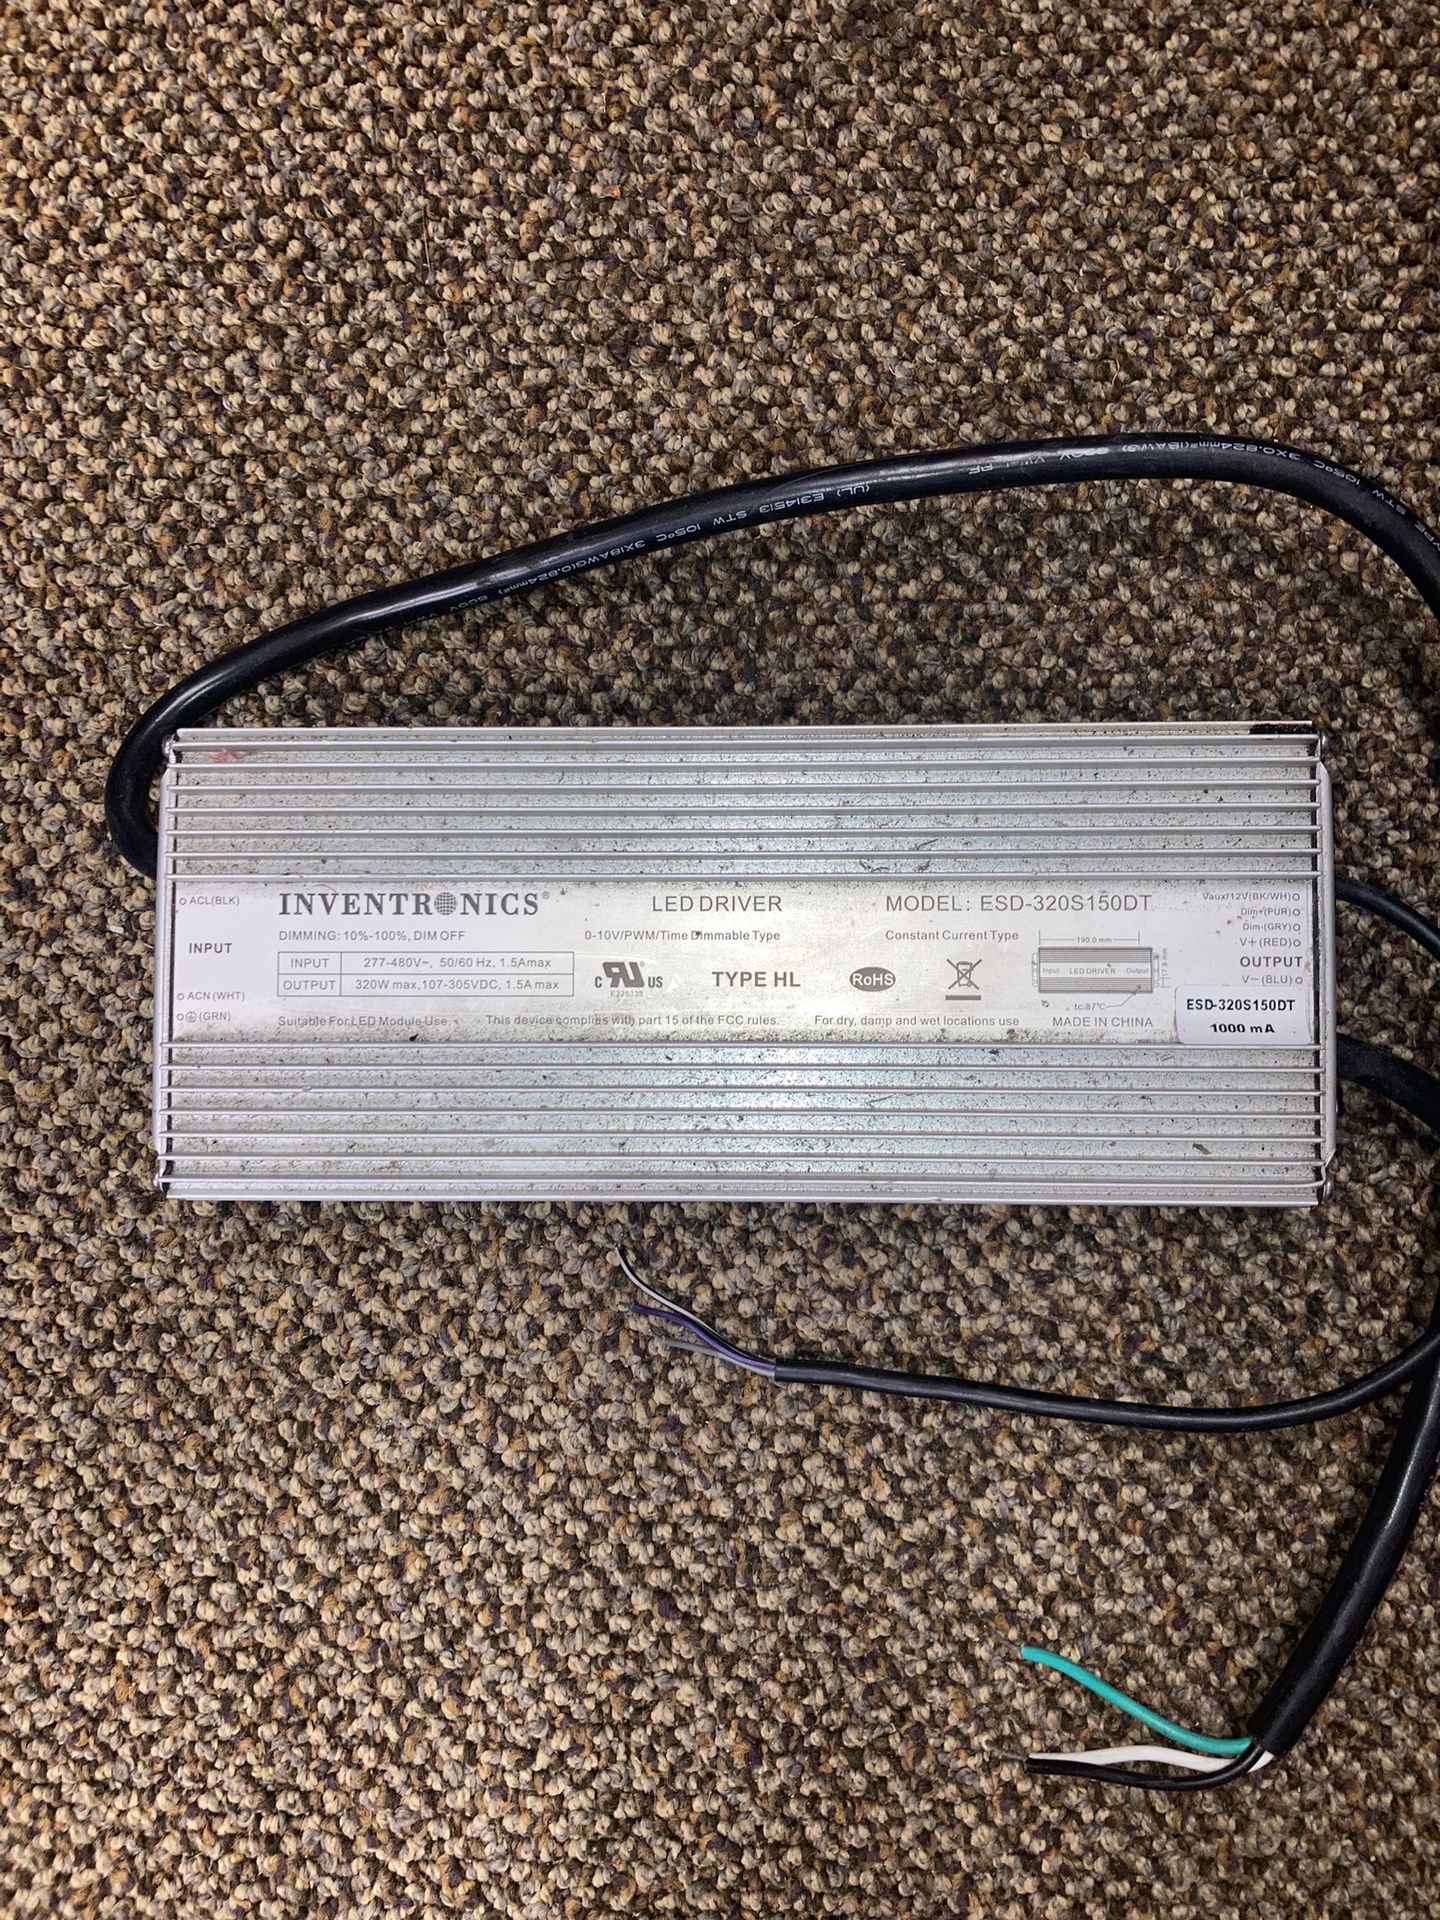 Inventronics ESD-320S150DT LED Power Supply Driver